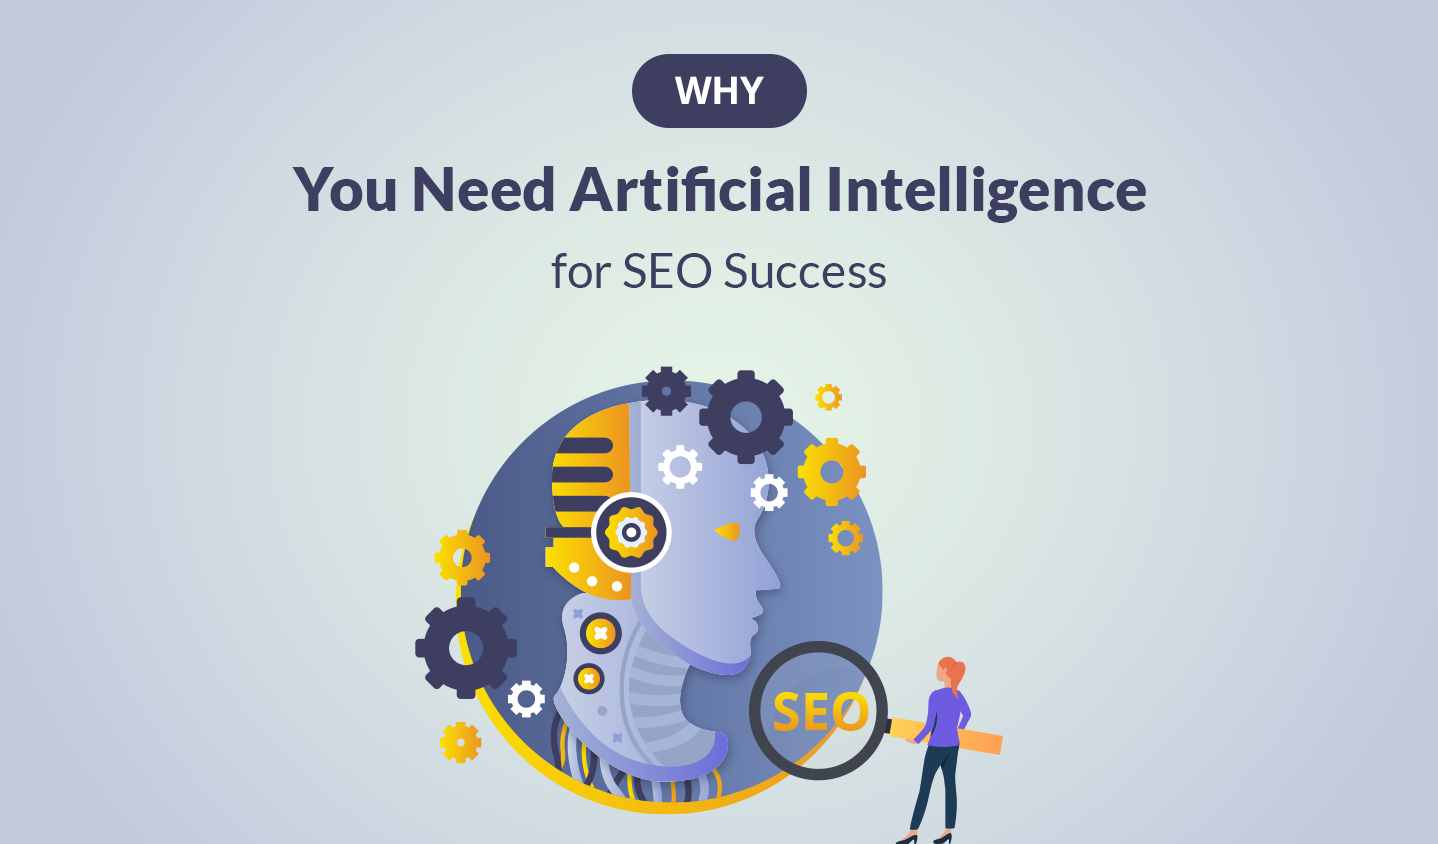 Why You Need Artificial Intelligence for SEO Success